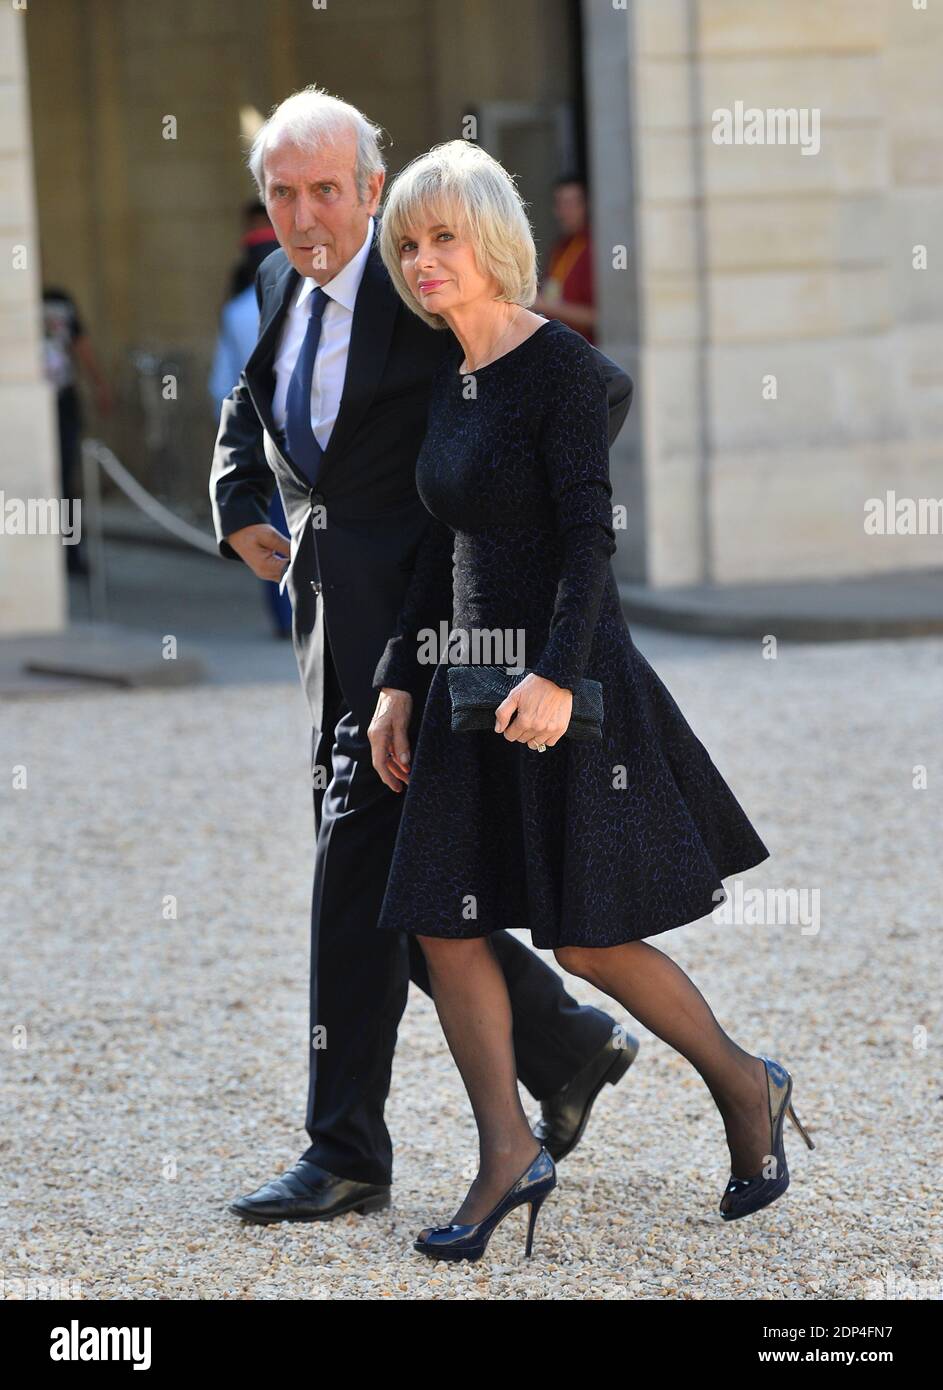 Former French Minister of Justice Elisabeth Guigou and husband Jean-Louis Guigou arriving at the Elysee Palace for a state dinner in honor of King Felipe VI and Queen Letizia of Spain, in Paris, France on June 2, 2015. The Spanish royal couple, who cut short their March 2015 state visit to France after a Germanwings Airbus crashed in the French Alps killing 45 Spanish citizens, are on a three-day official state visit to France. Photo by Christian Liewig/ABACAPRESS.COM Stock Photo